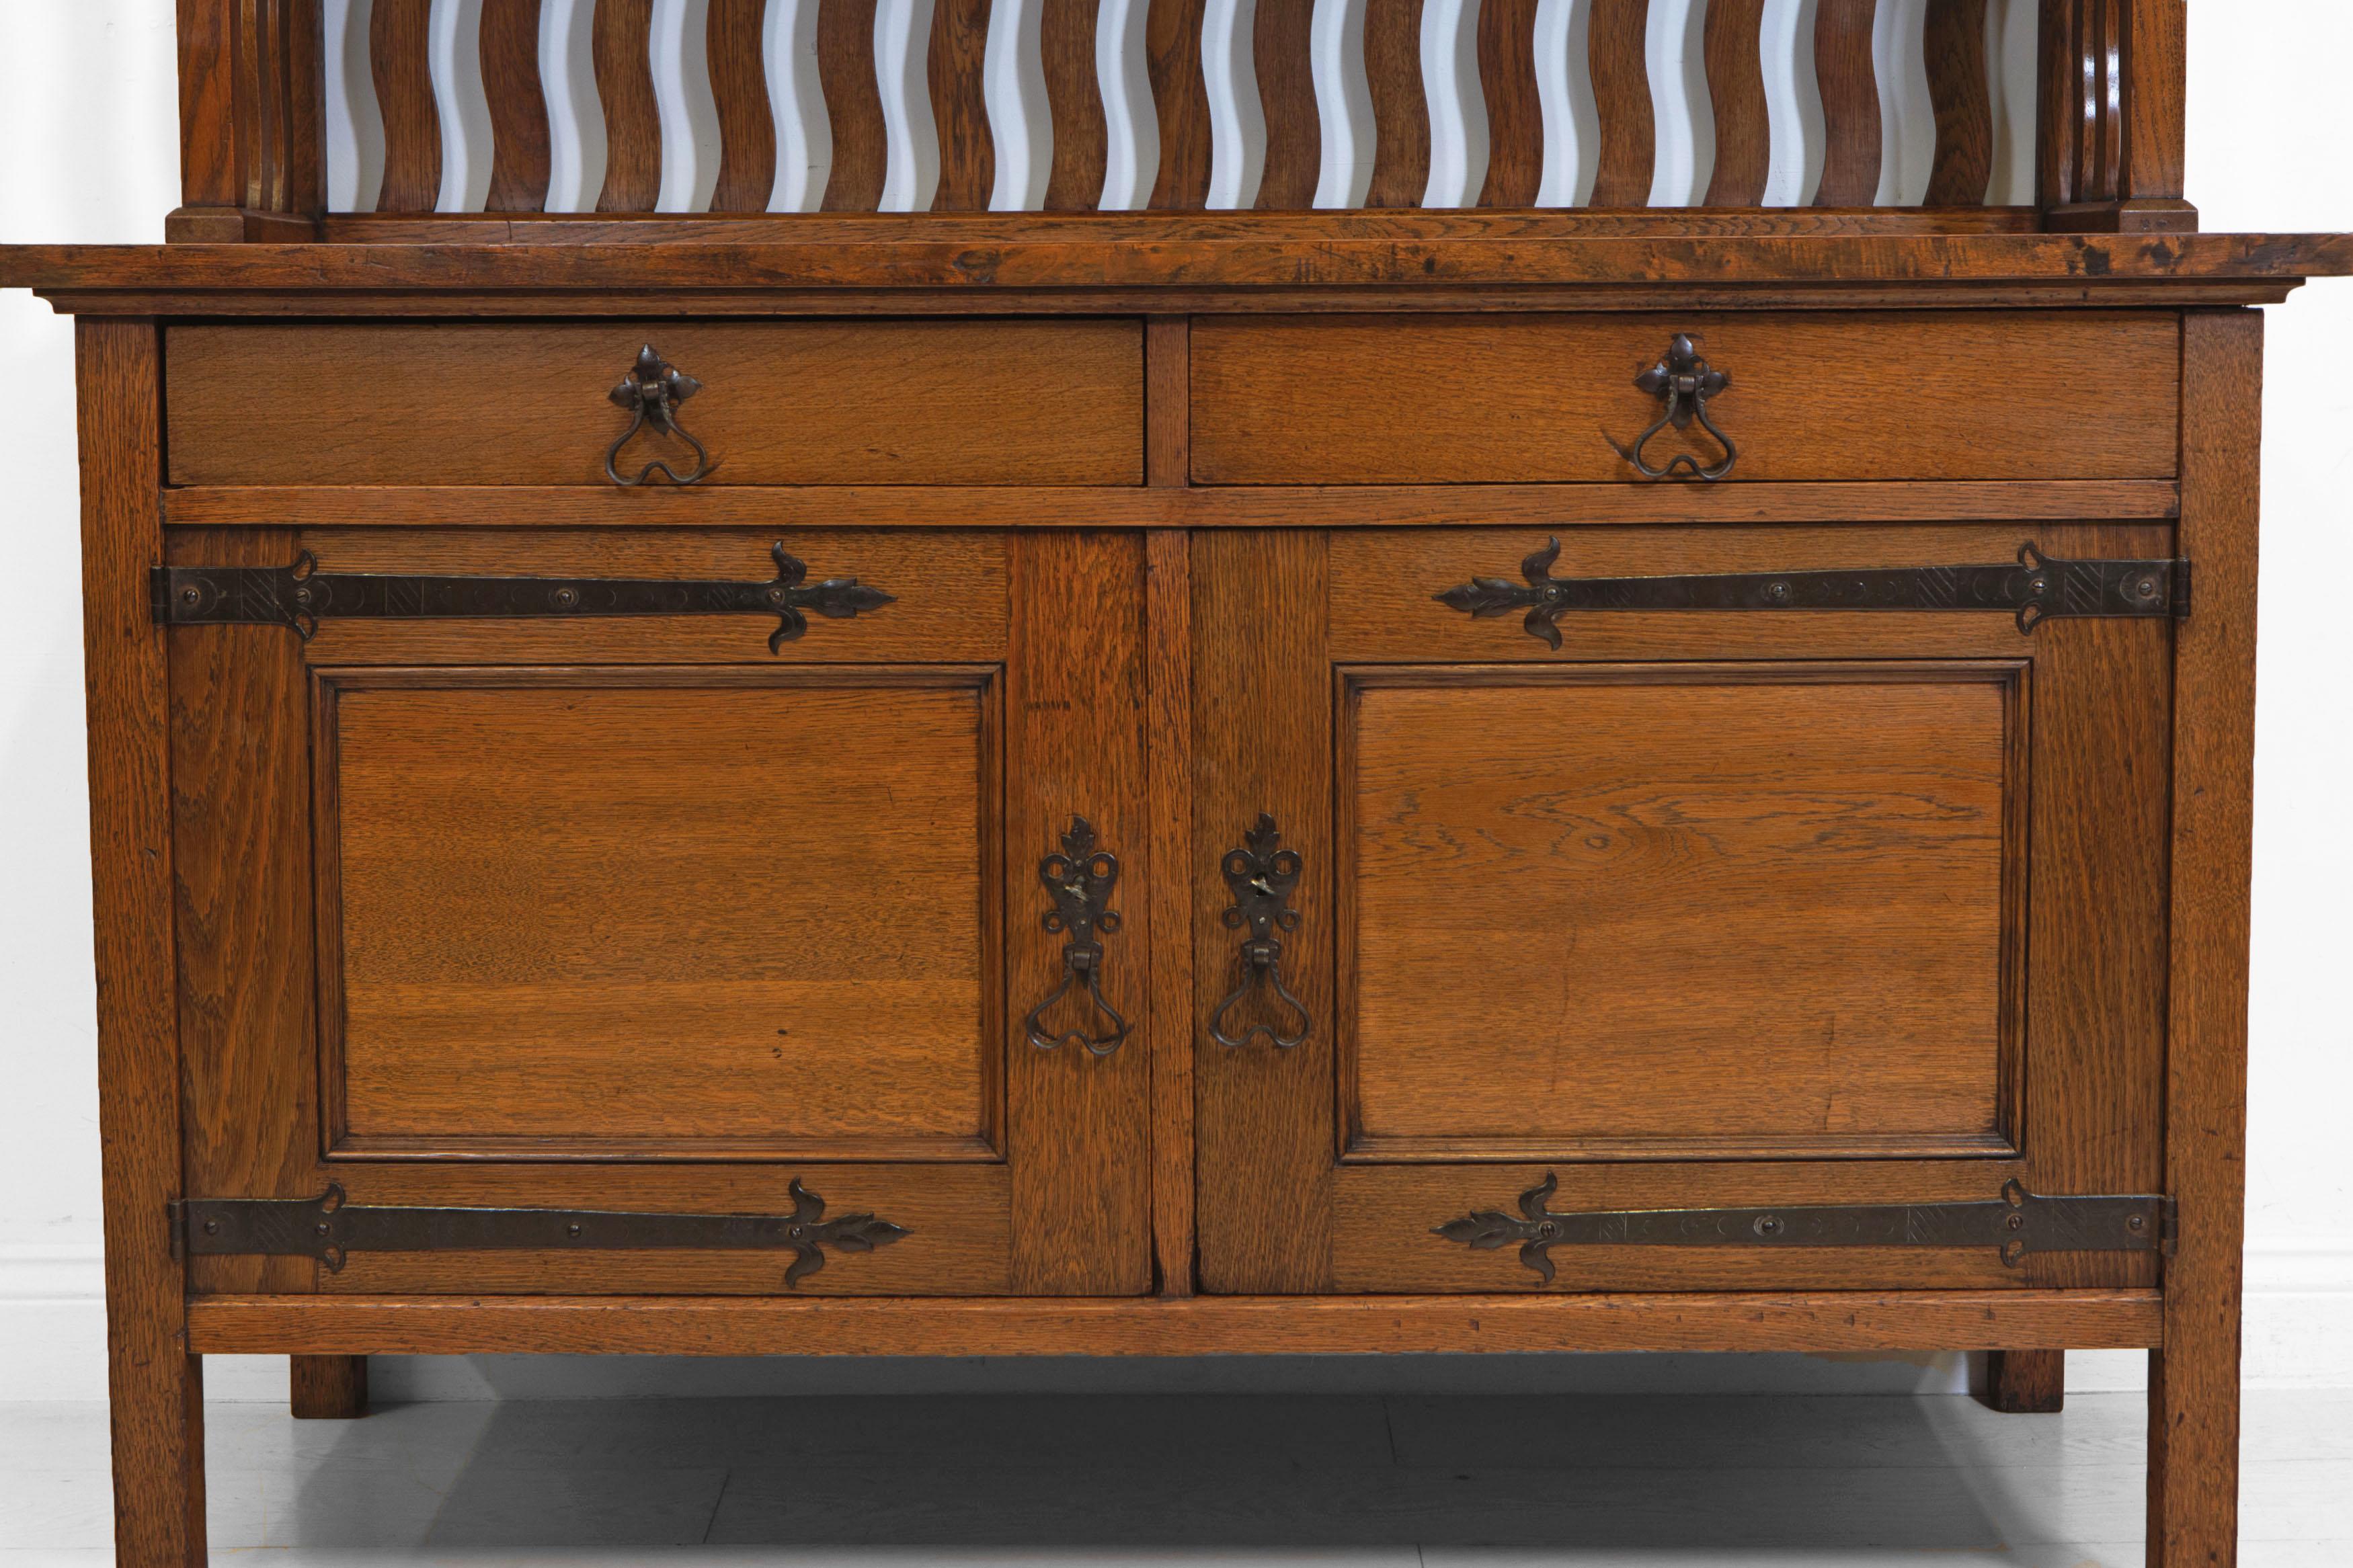 Arts & Crafts oak sideboard cabinet in the Liberty & Co manner, with decorative metal strap work hinges and handles, and a wavy slatted back gallery. English. Circa 1900.

In excellent clean condition, it has has been sympathetically re-finished,